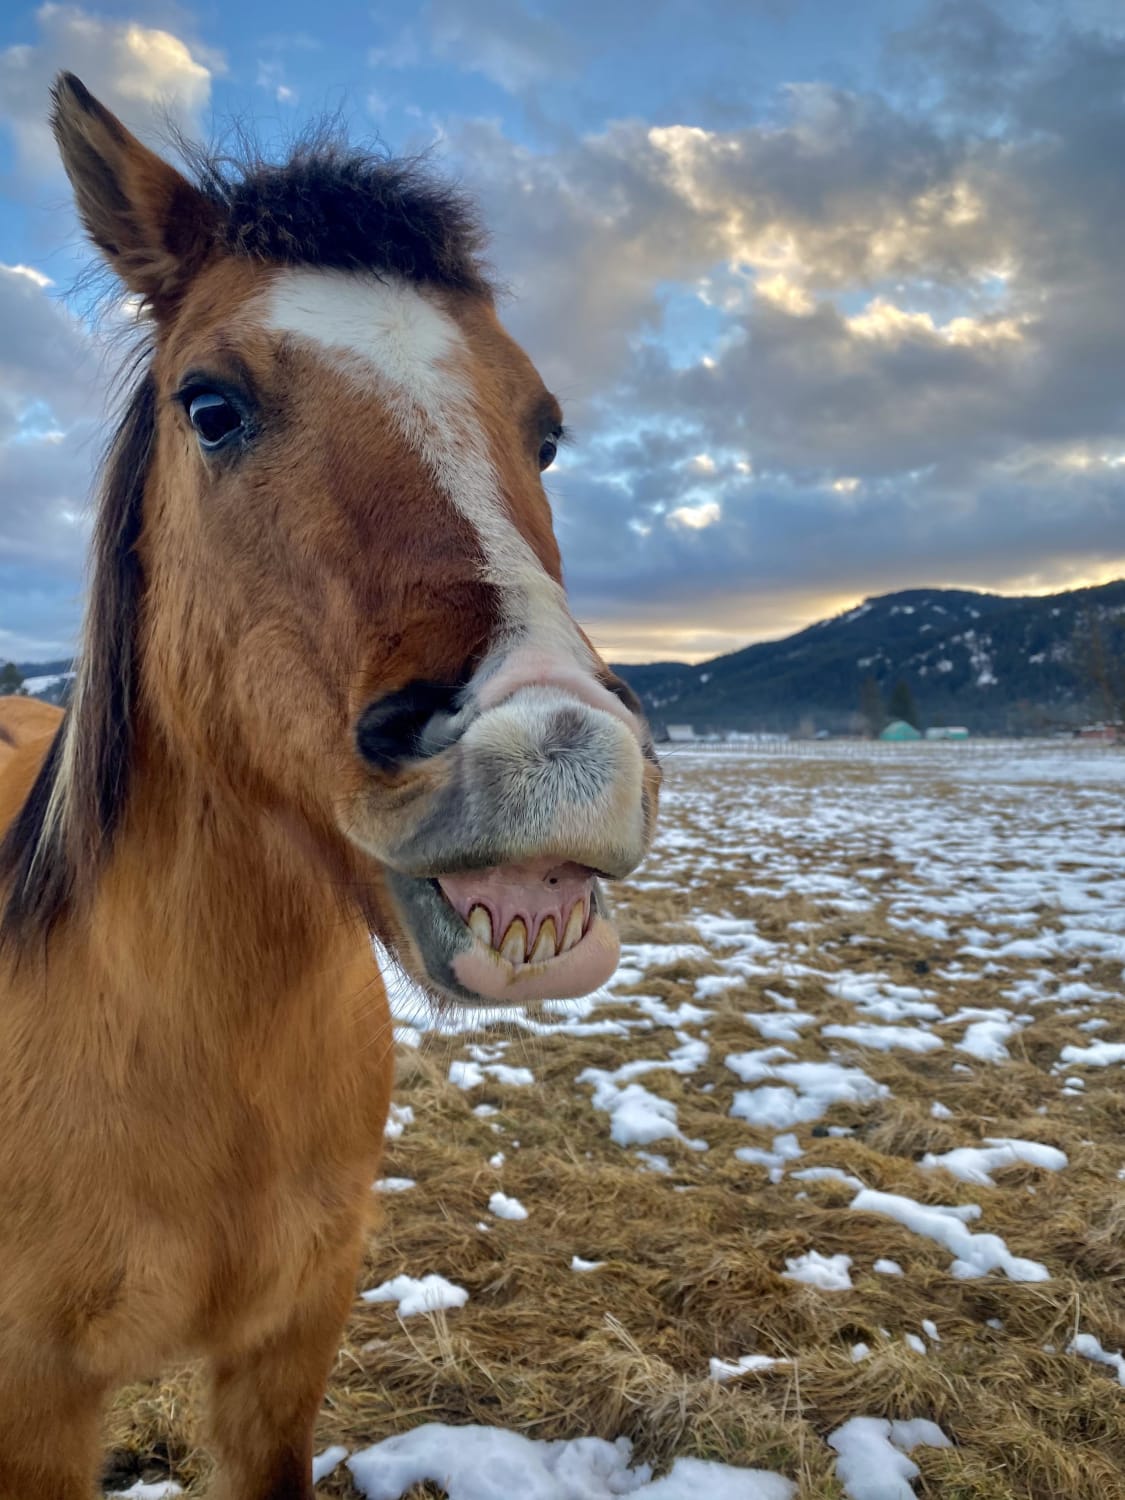 ITAP of my grinning horse